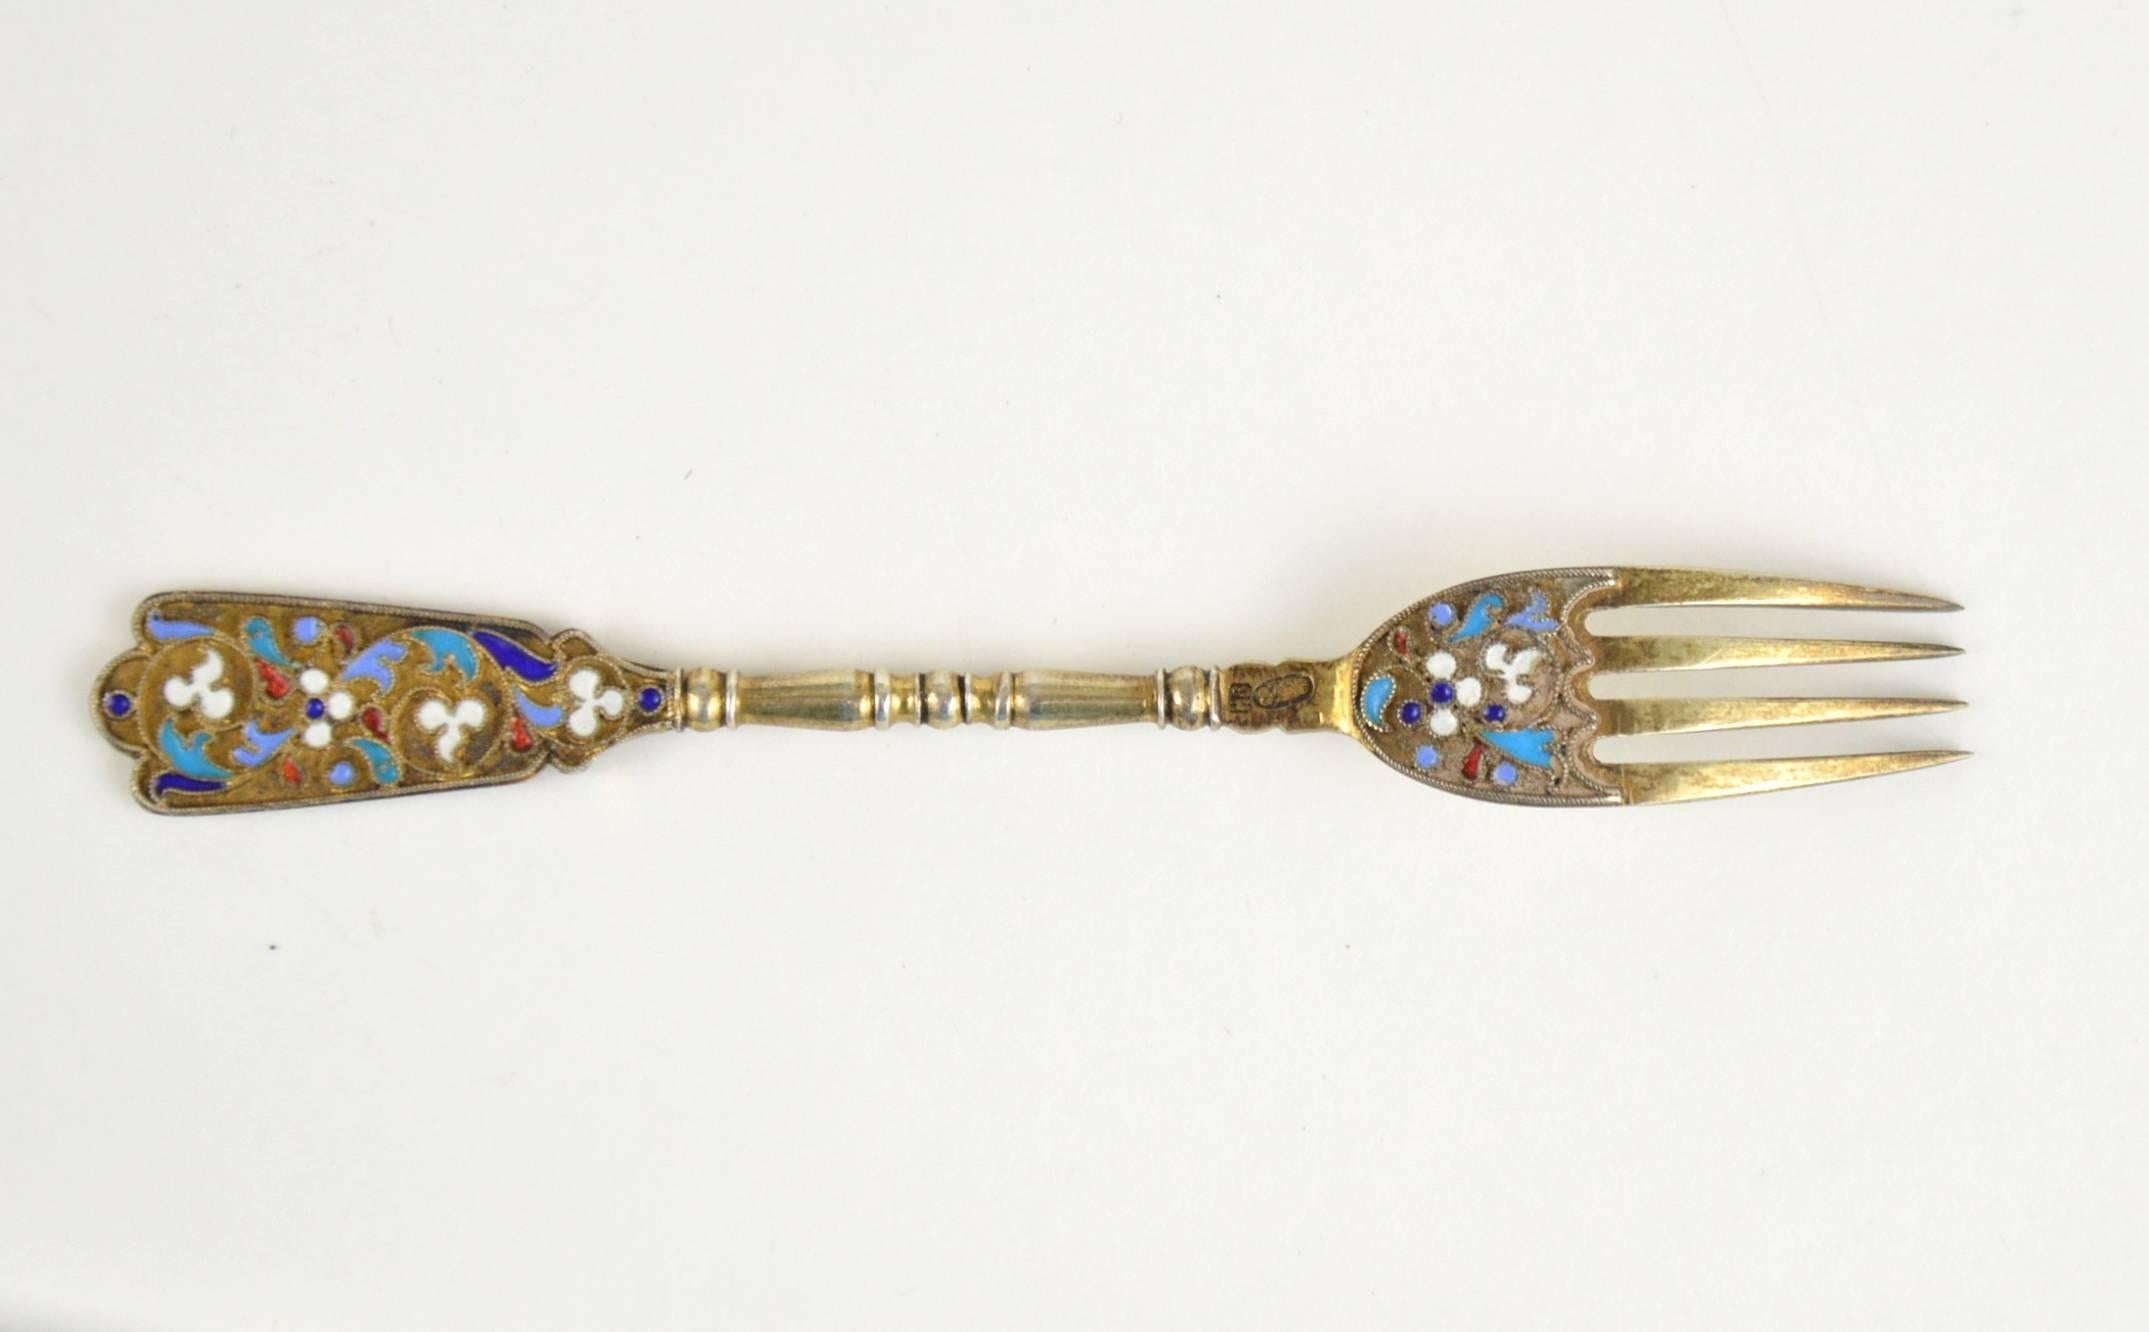 Imperial Russian cloisonné enamel and silver fork. Finely hand decorated with a multi-color enamel scrolling foliage, flowers and pan-slavic ornamentation against a gilt stippled background. Hallmarked with '84' Imperial Russian Silver standard and